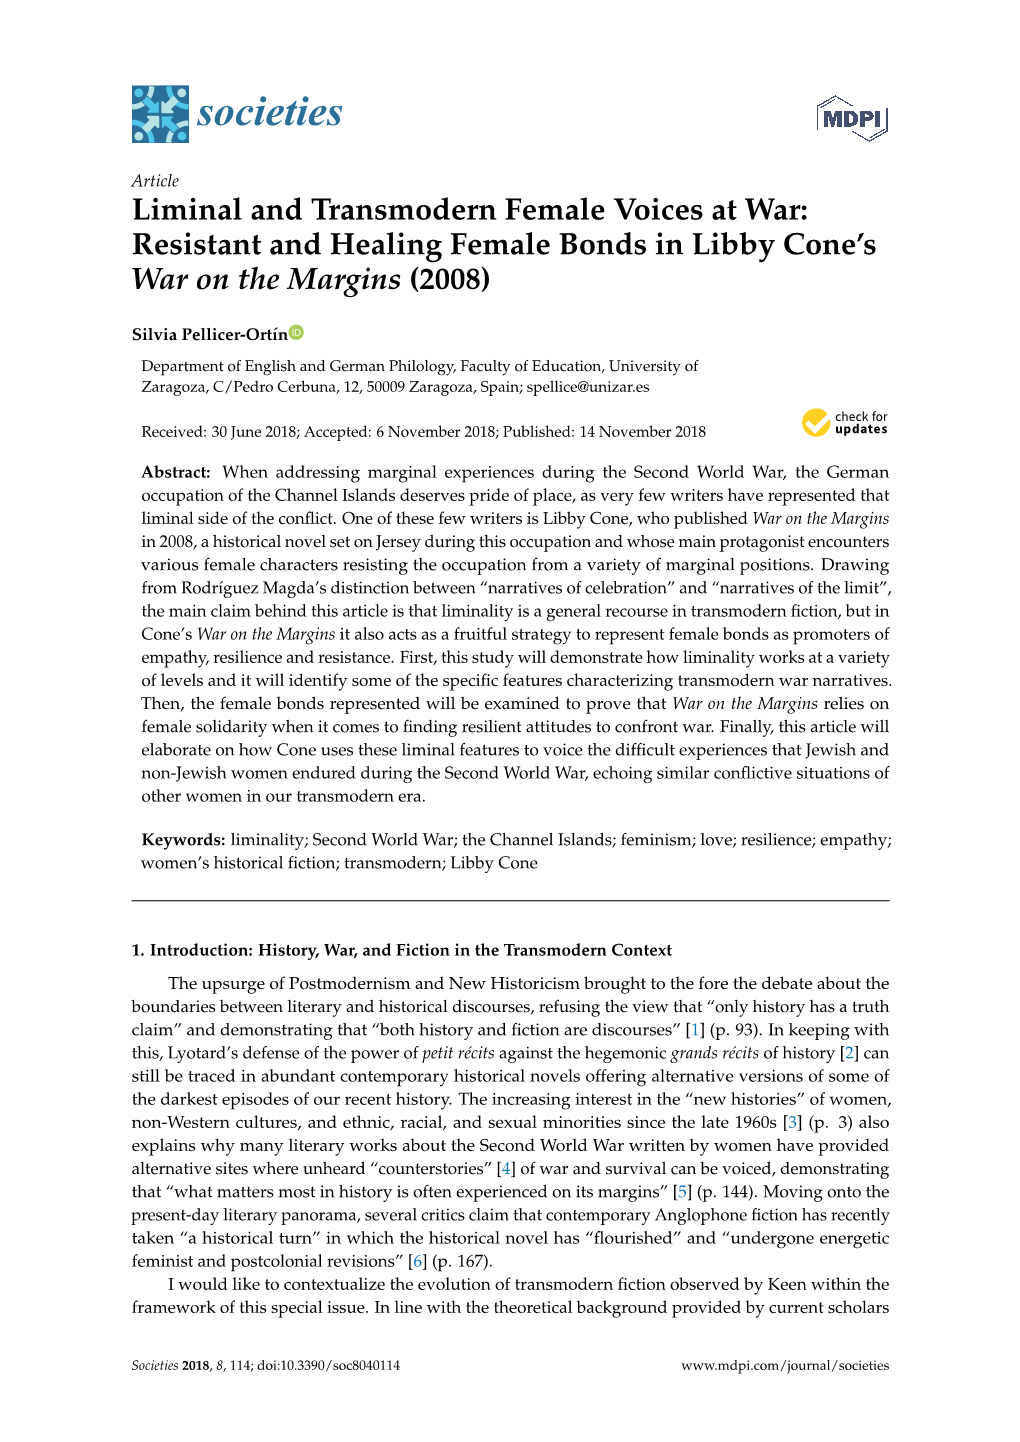 Liminal and Transmodern Female Voices at War: Resistant and Healing Female Bonds in Libby Cone’S War on the Margins (2008)